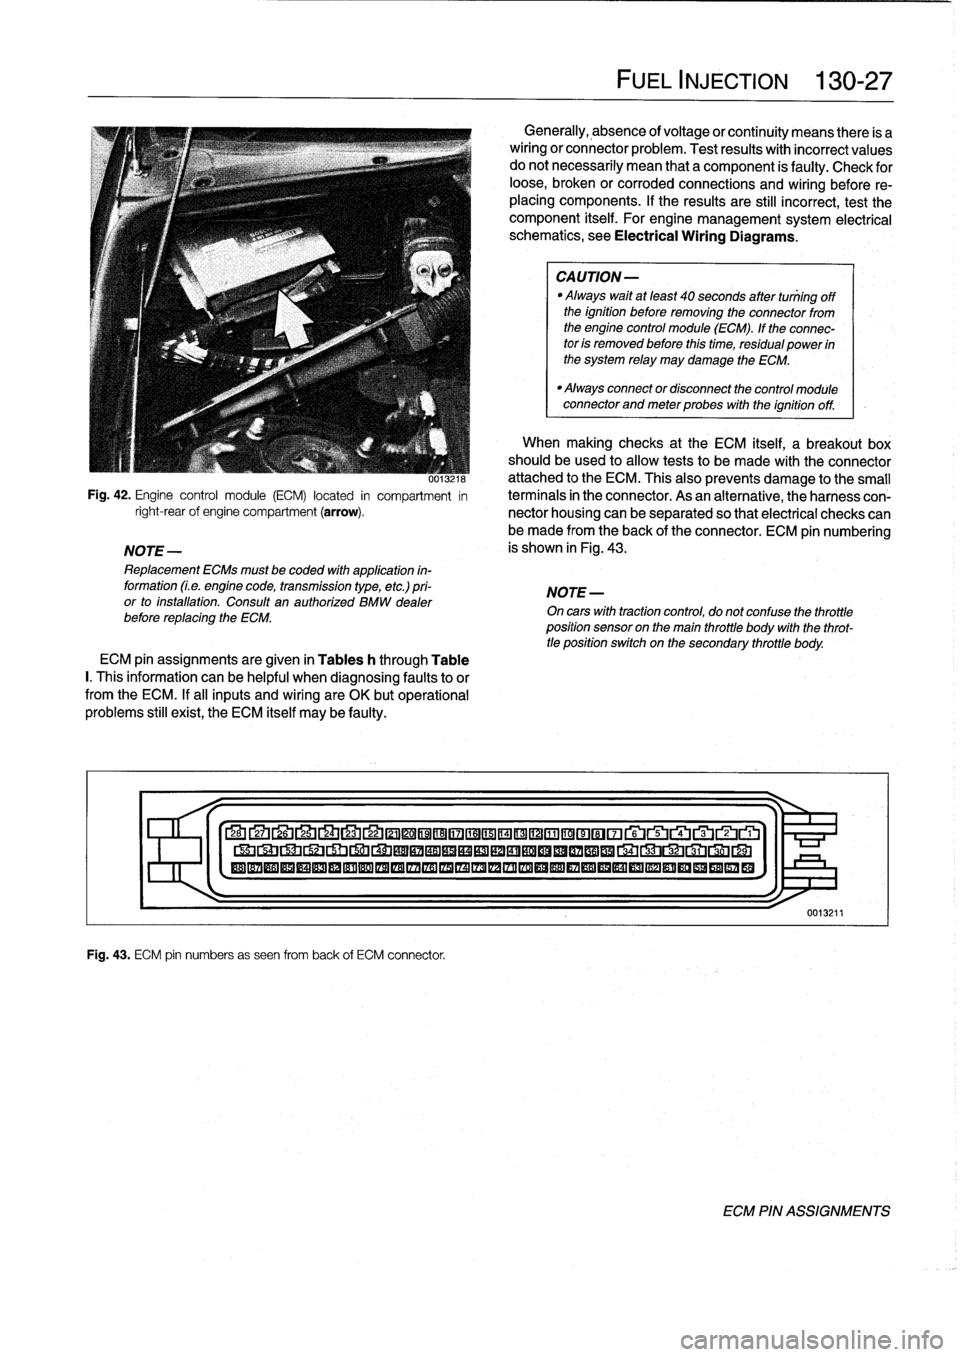 BMW 328i 1995 E36 Workshop Manual 
0013ZIM
Fig
.
42
.
Engine
control
module
(ECM)
located
in
compartment
in
right-rearof
engine
compartment
(arrow)
.

NOTE-

Replacement
ECMs
must
be
coded
with
application
in-
formation
(Le
.
engine
c